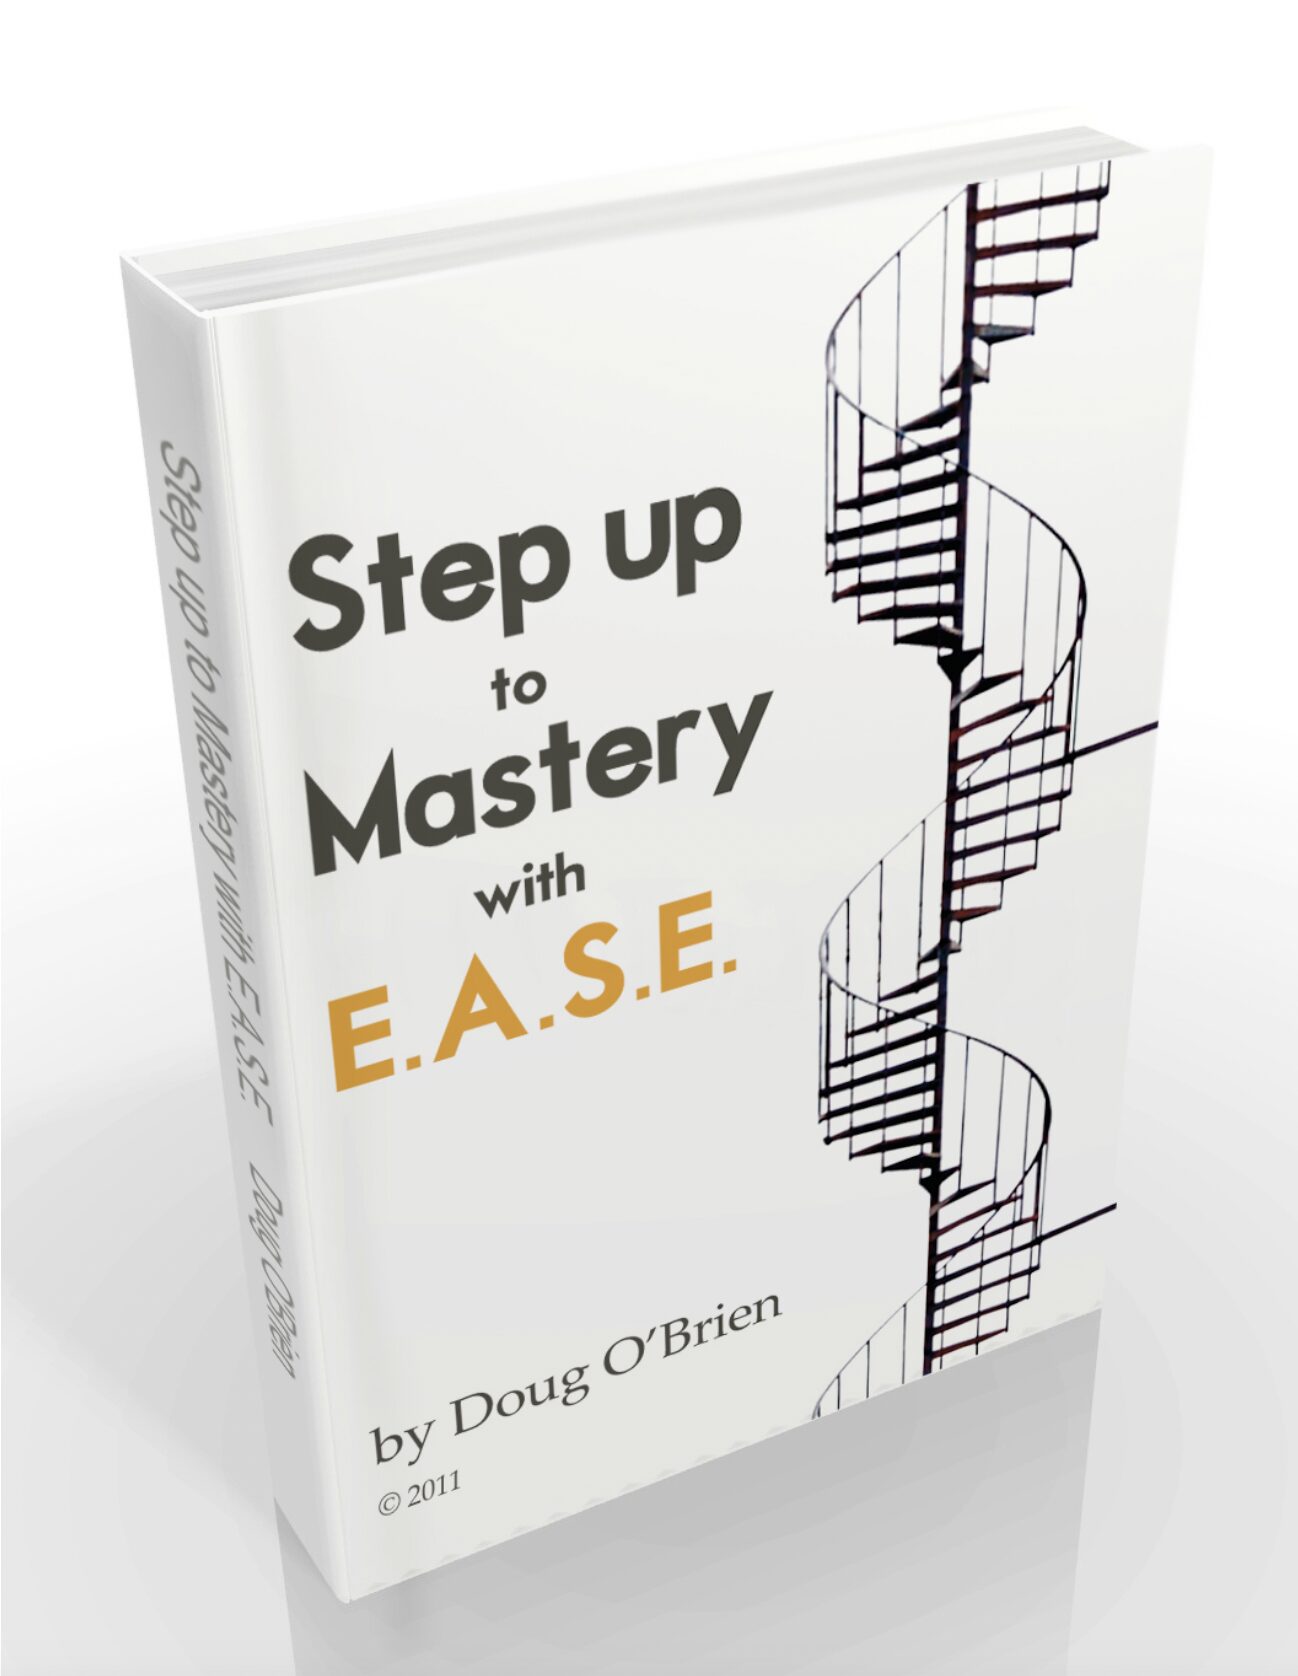 "Step Up To Mastery with EASE" Book Cover